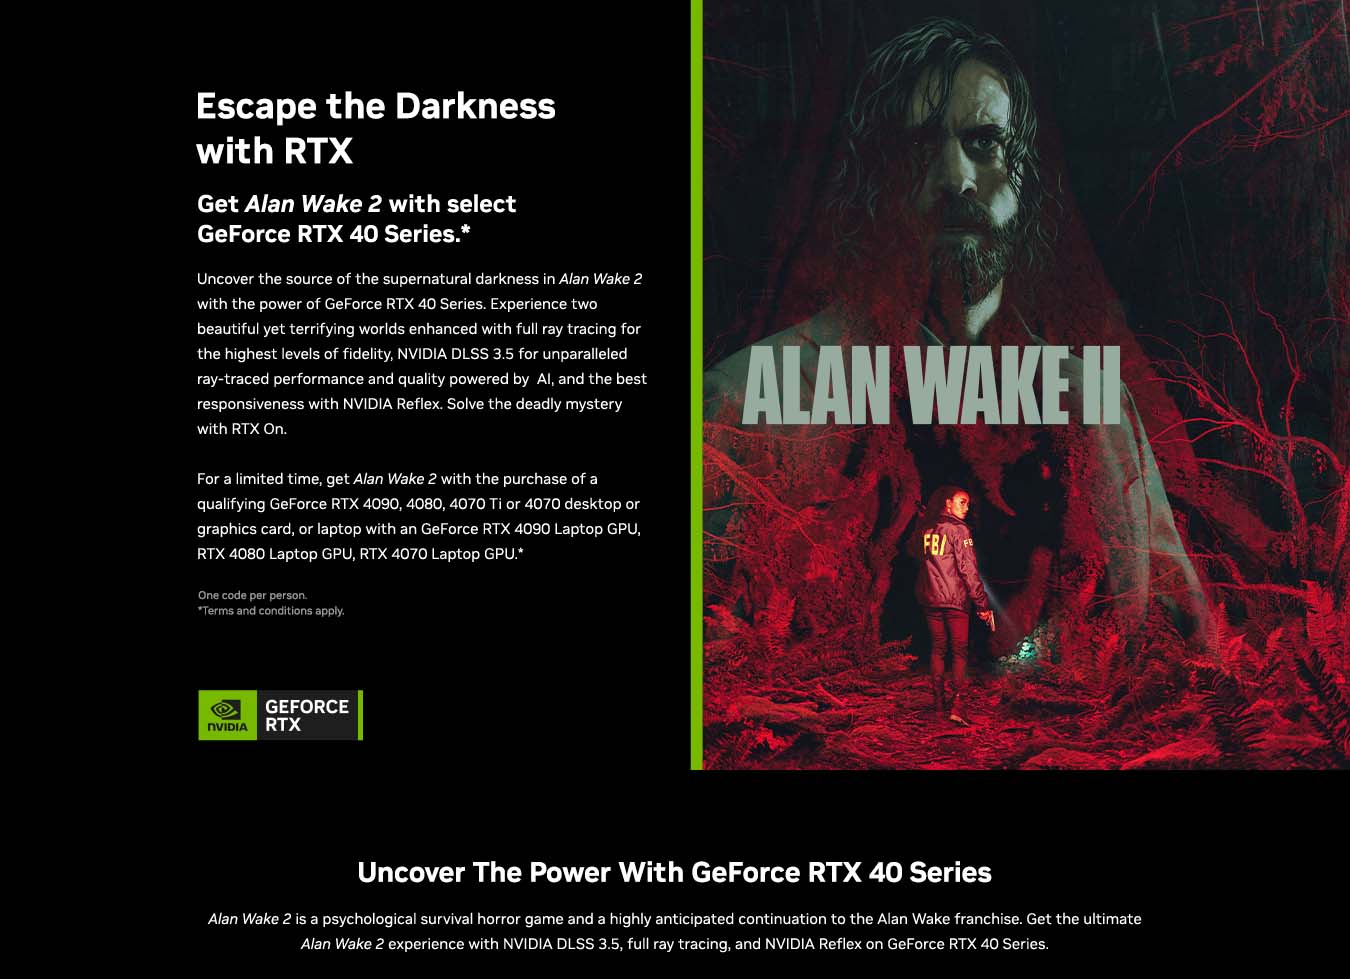 Escape The Darkness with RTX